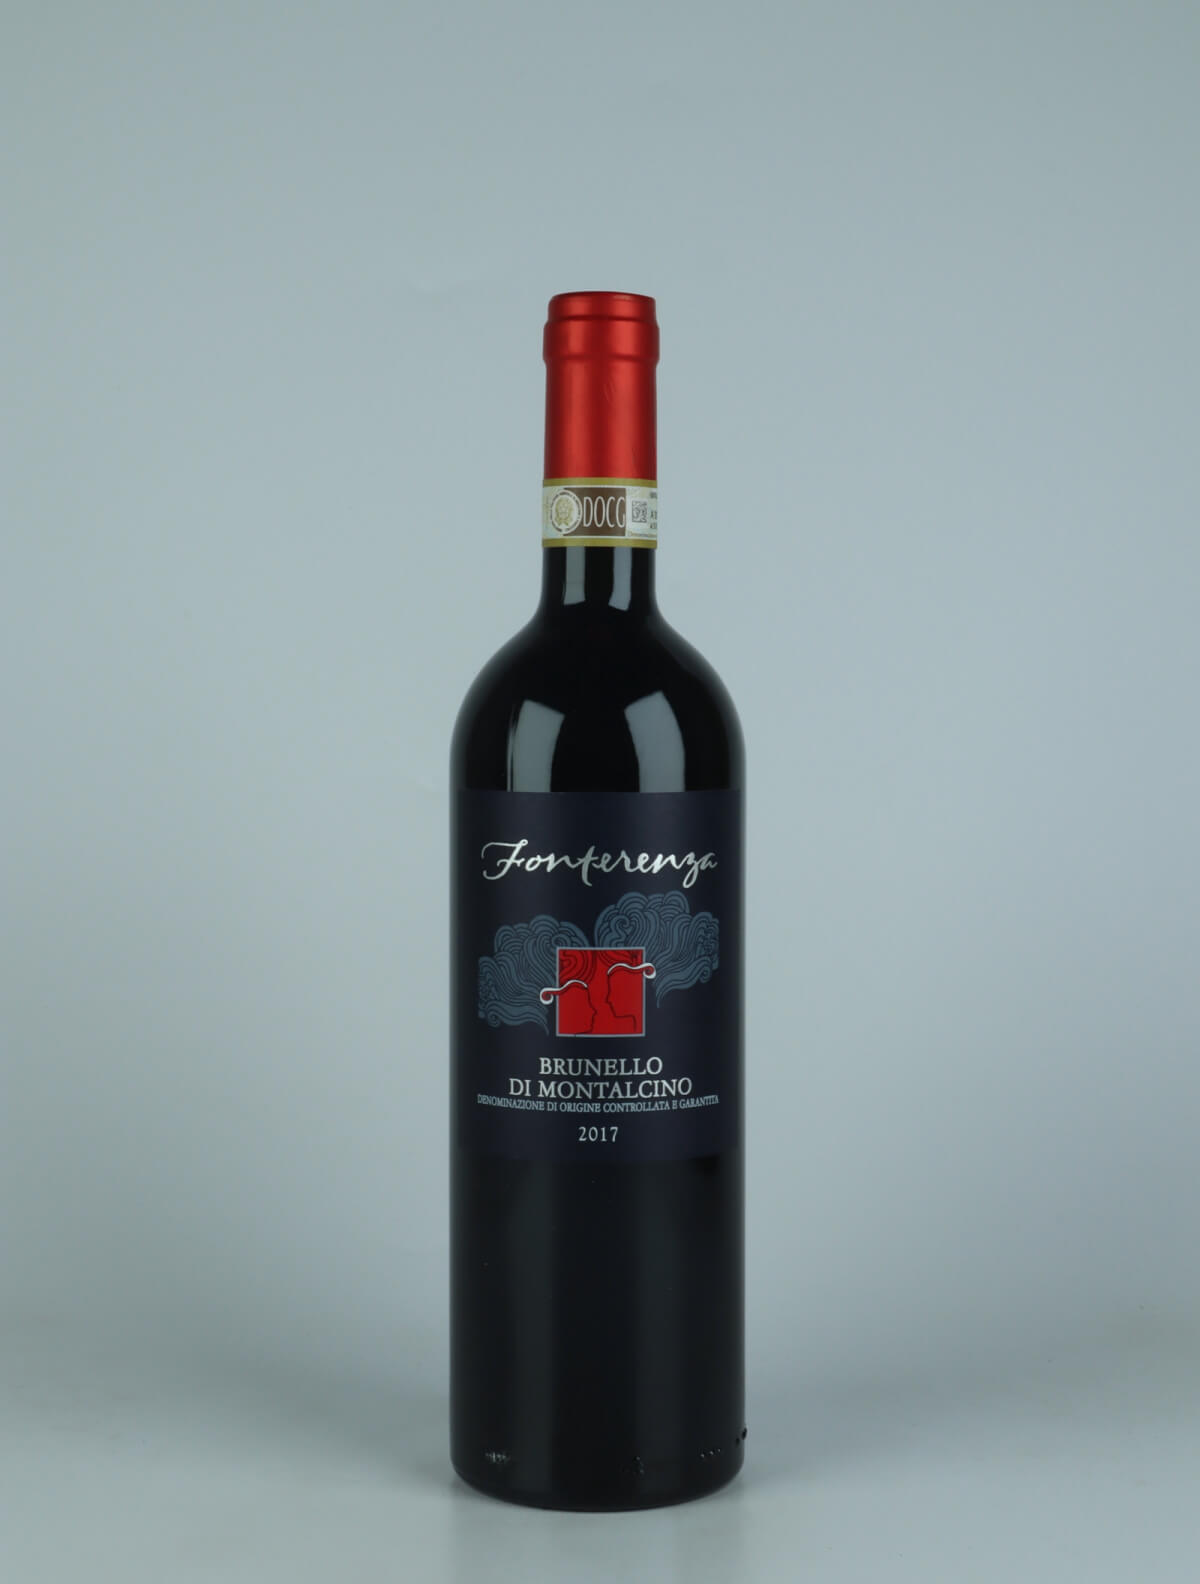 A bottle 2017 Brunello di Montalcino Red wine from Fonterenza, Tuscany in Italy